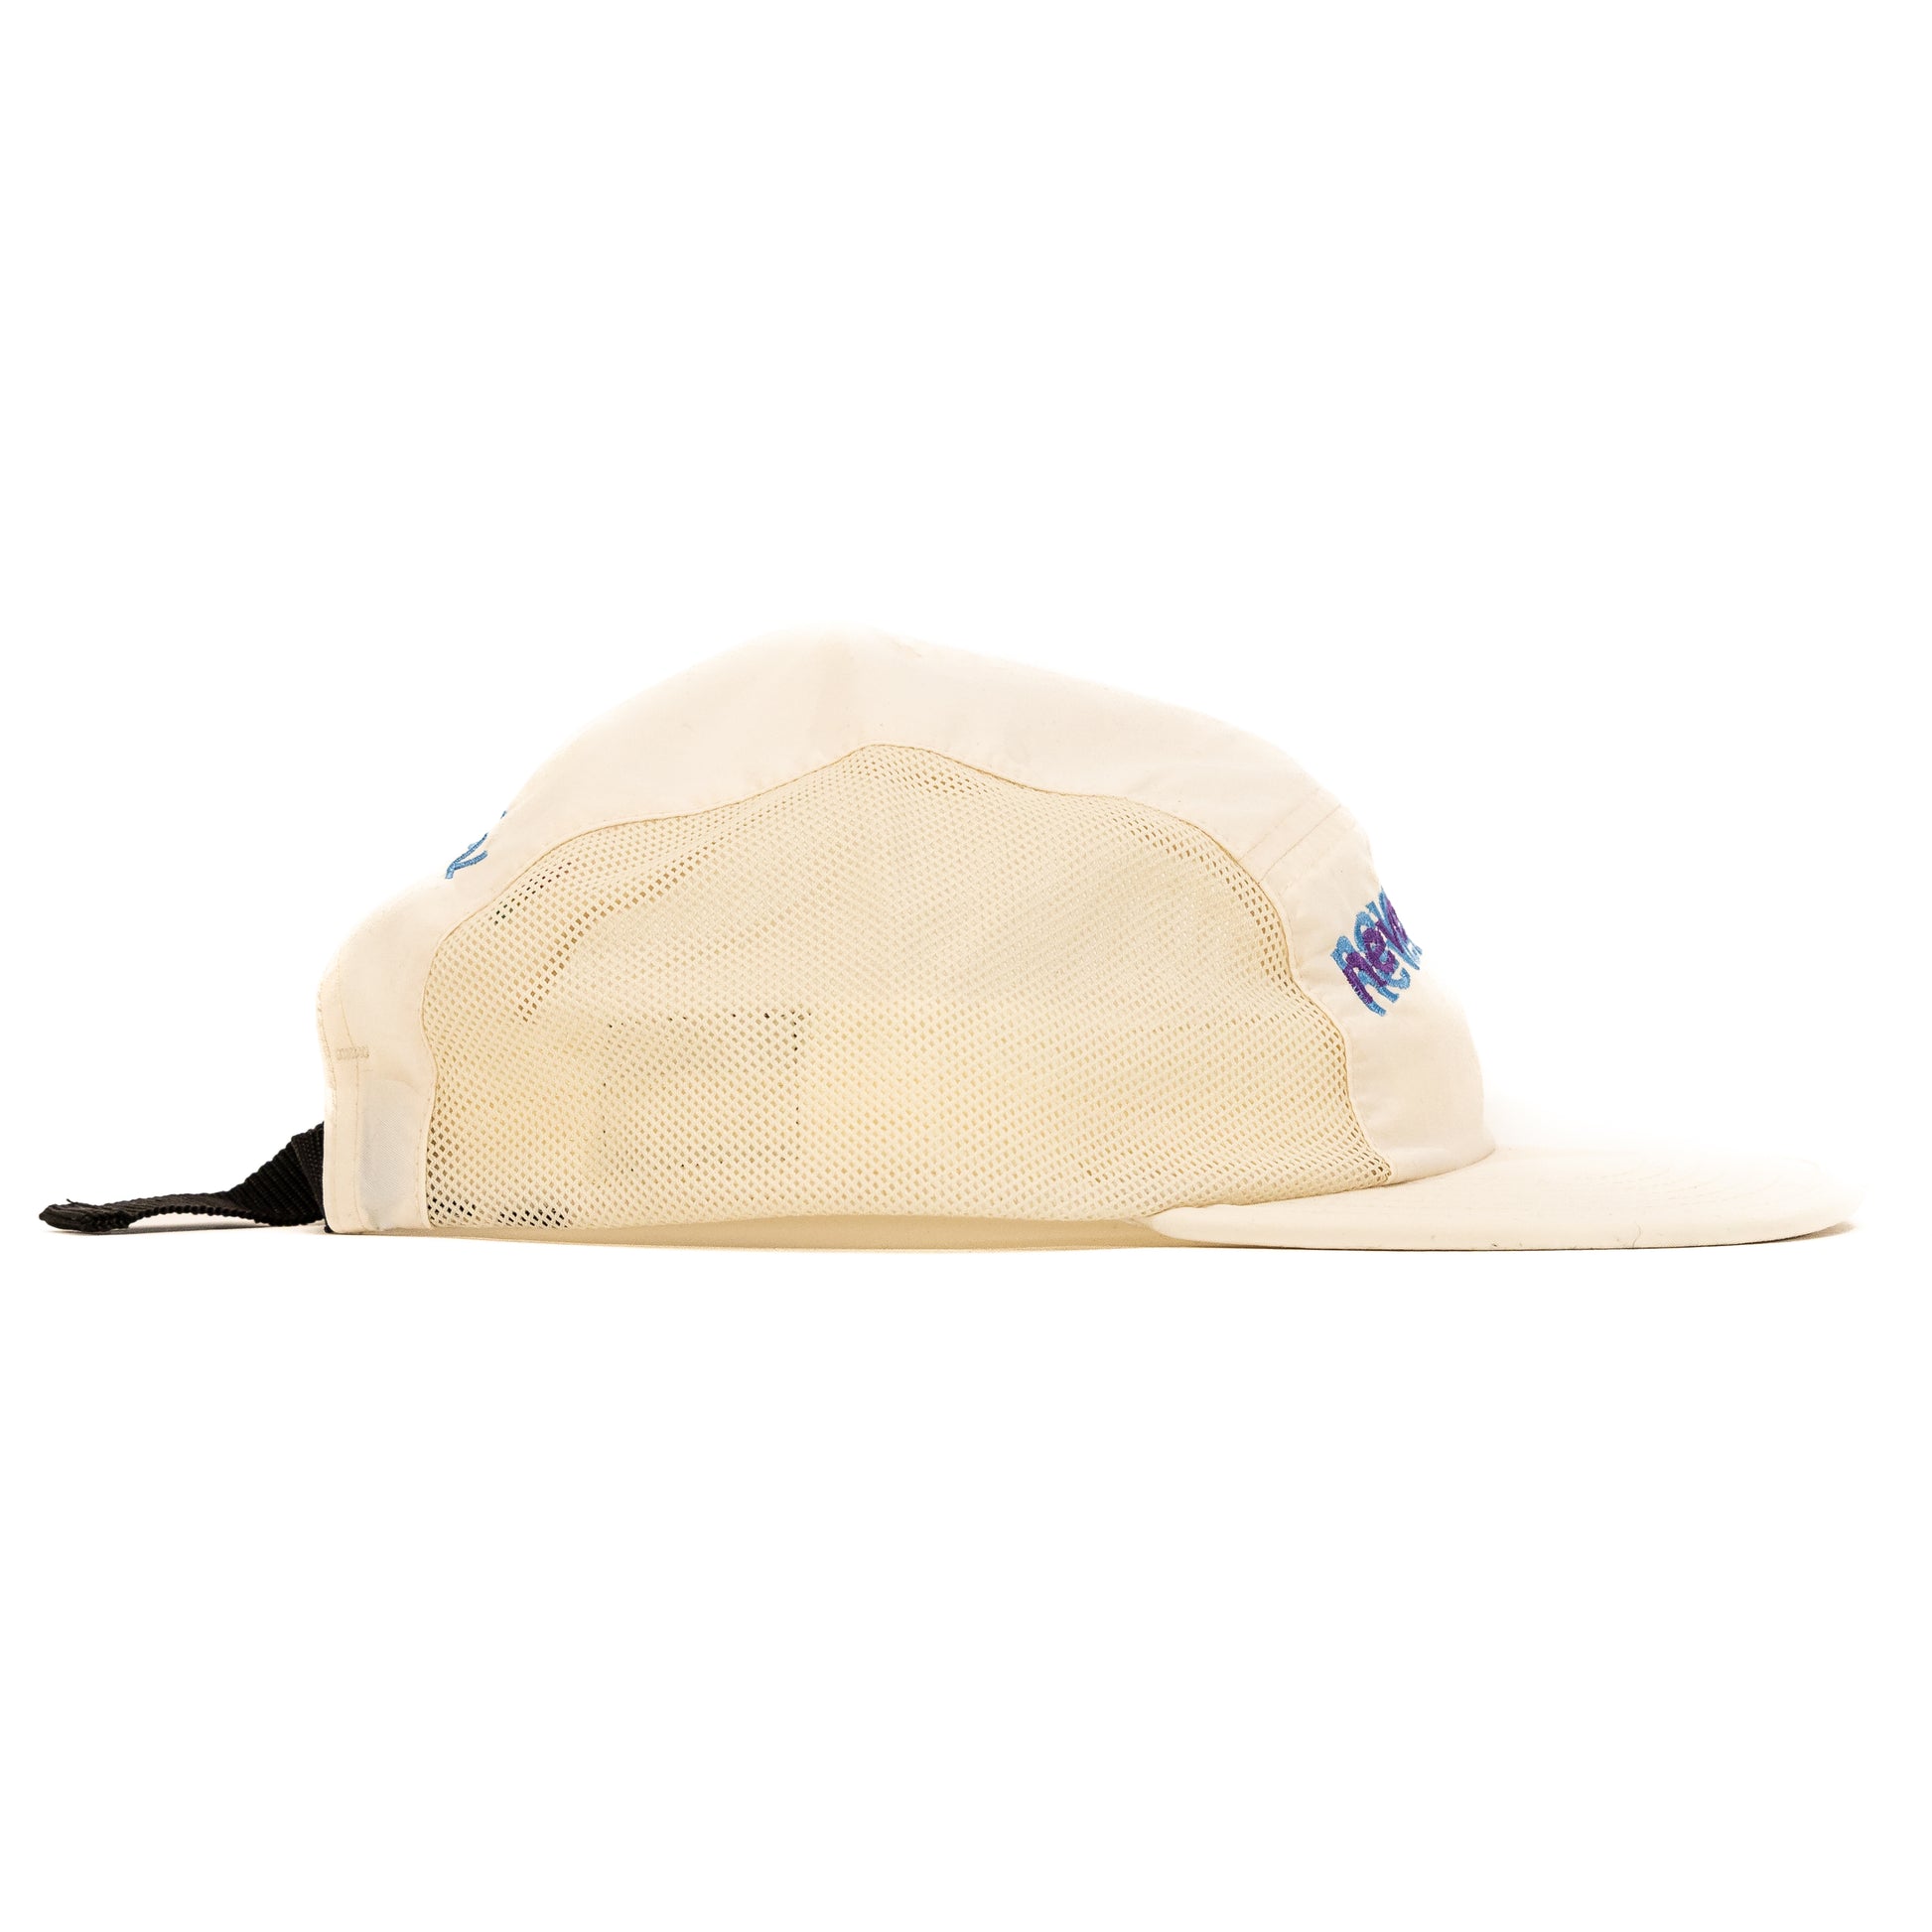 Never No More 5 Panel Hat, Cream - Layr Official